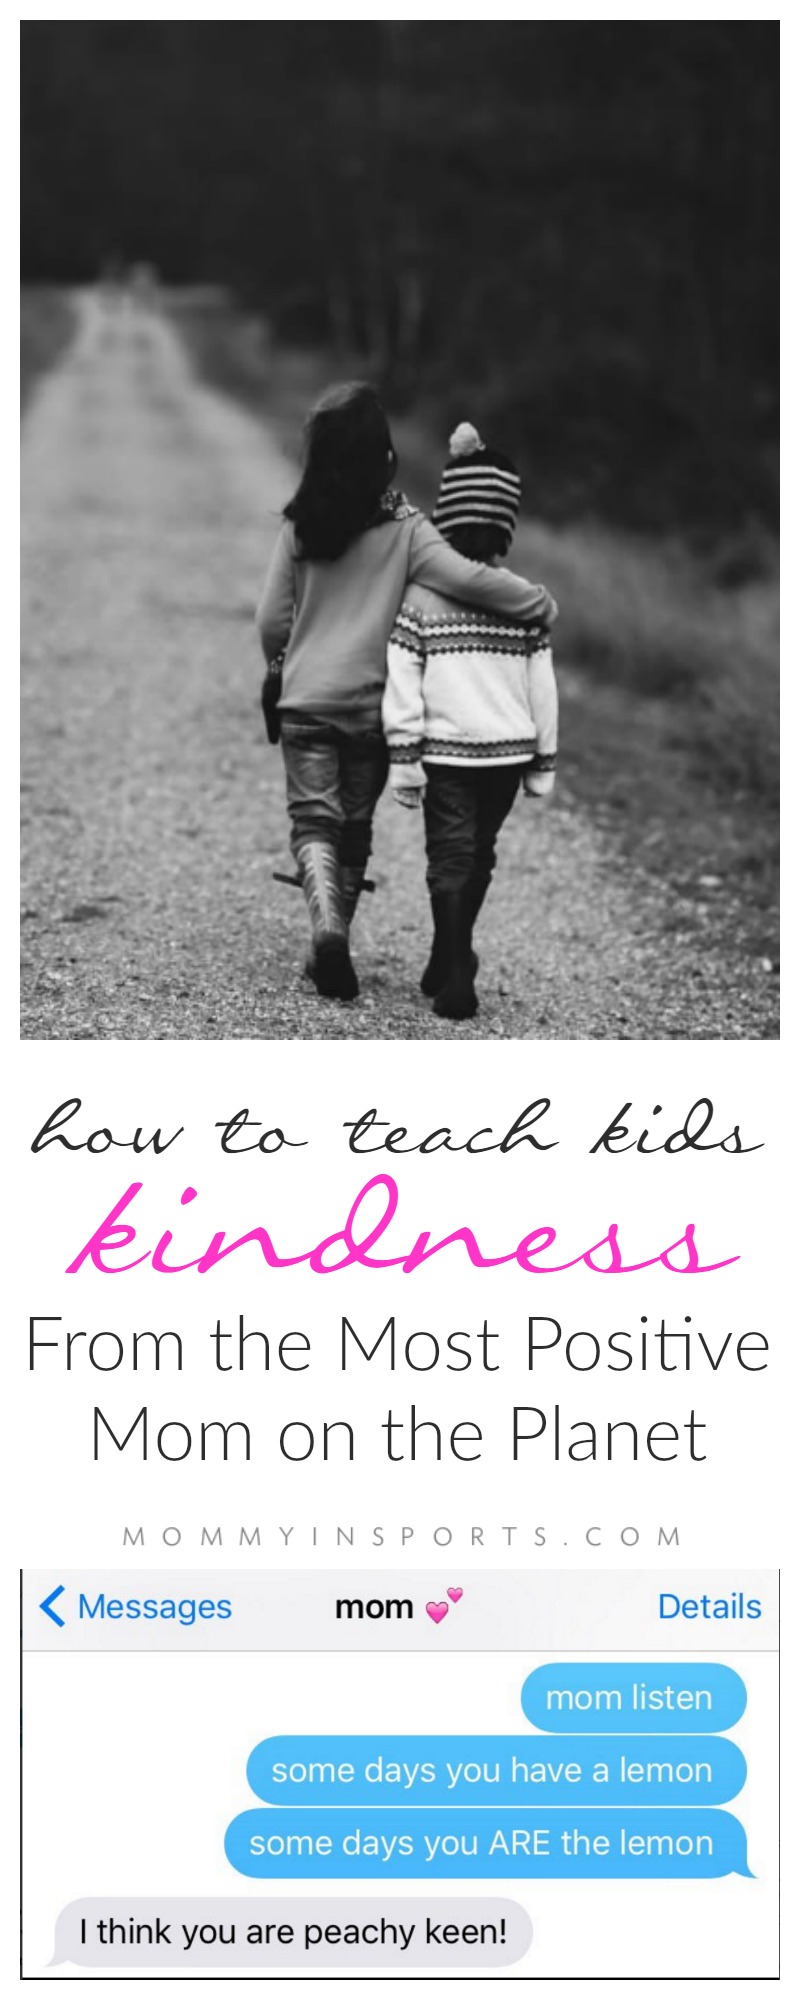 how-to-teach-kids-kindness-from-the-most-positive-mom-on-the-planet